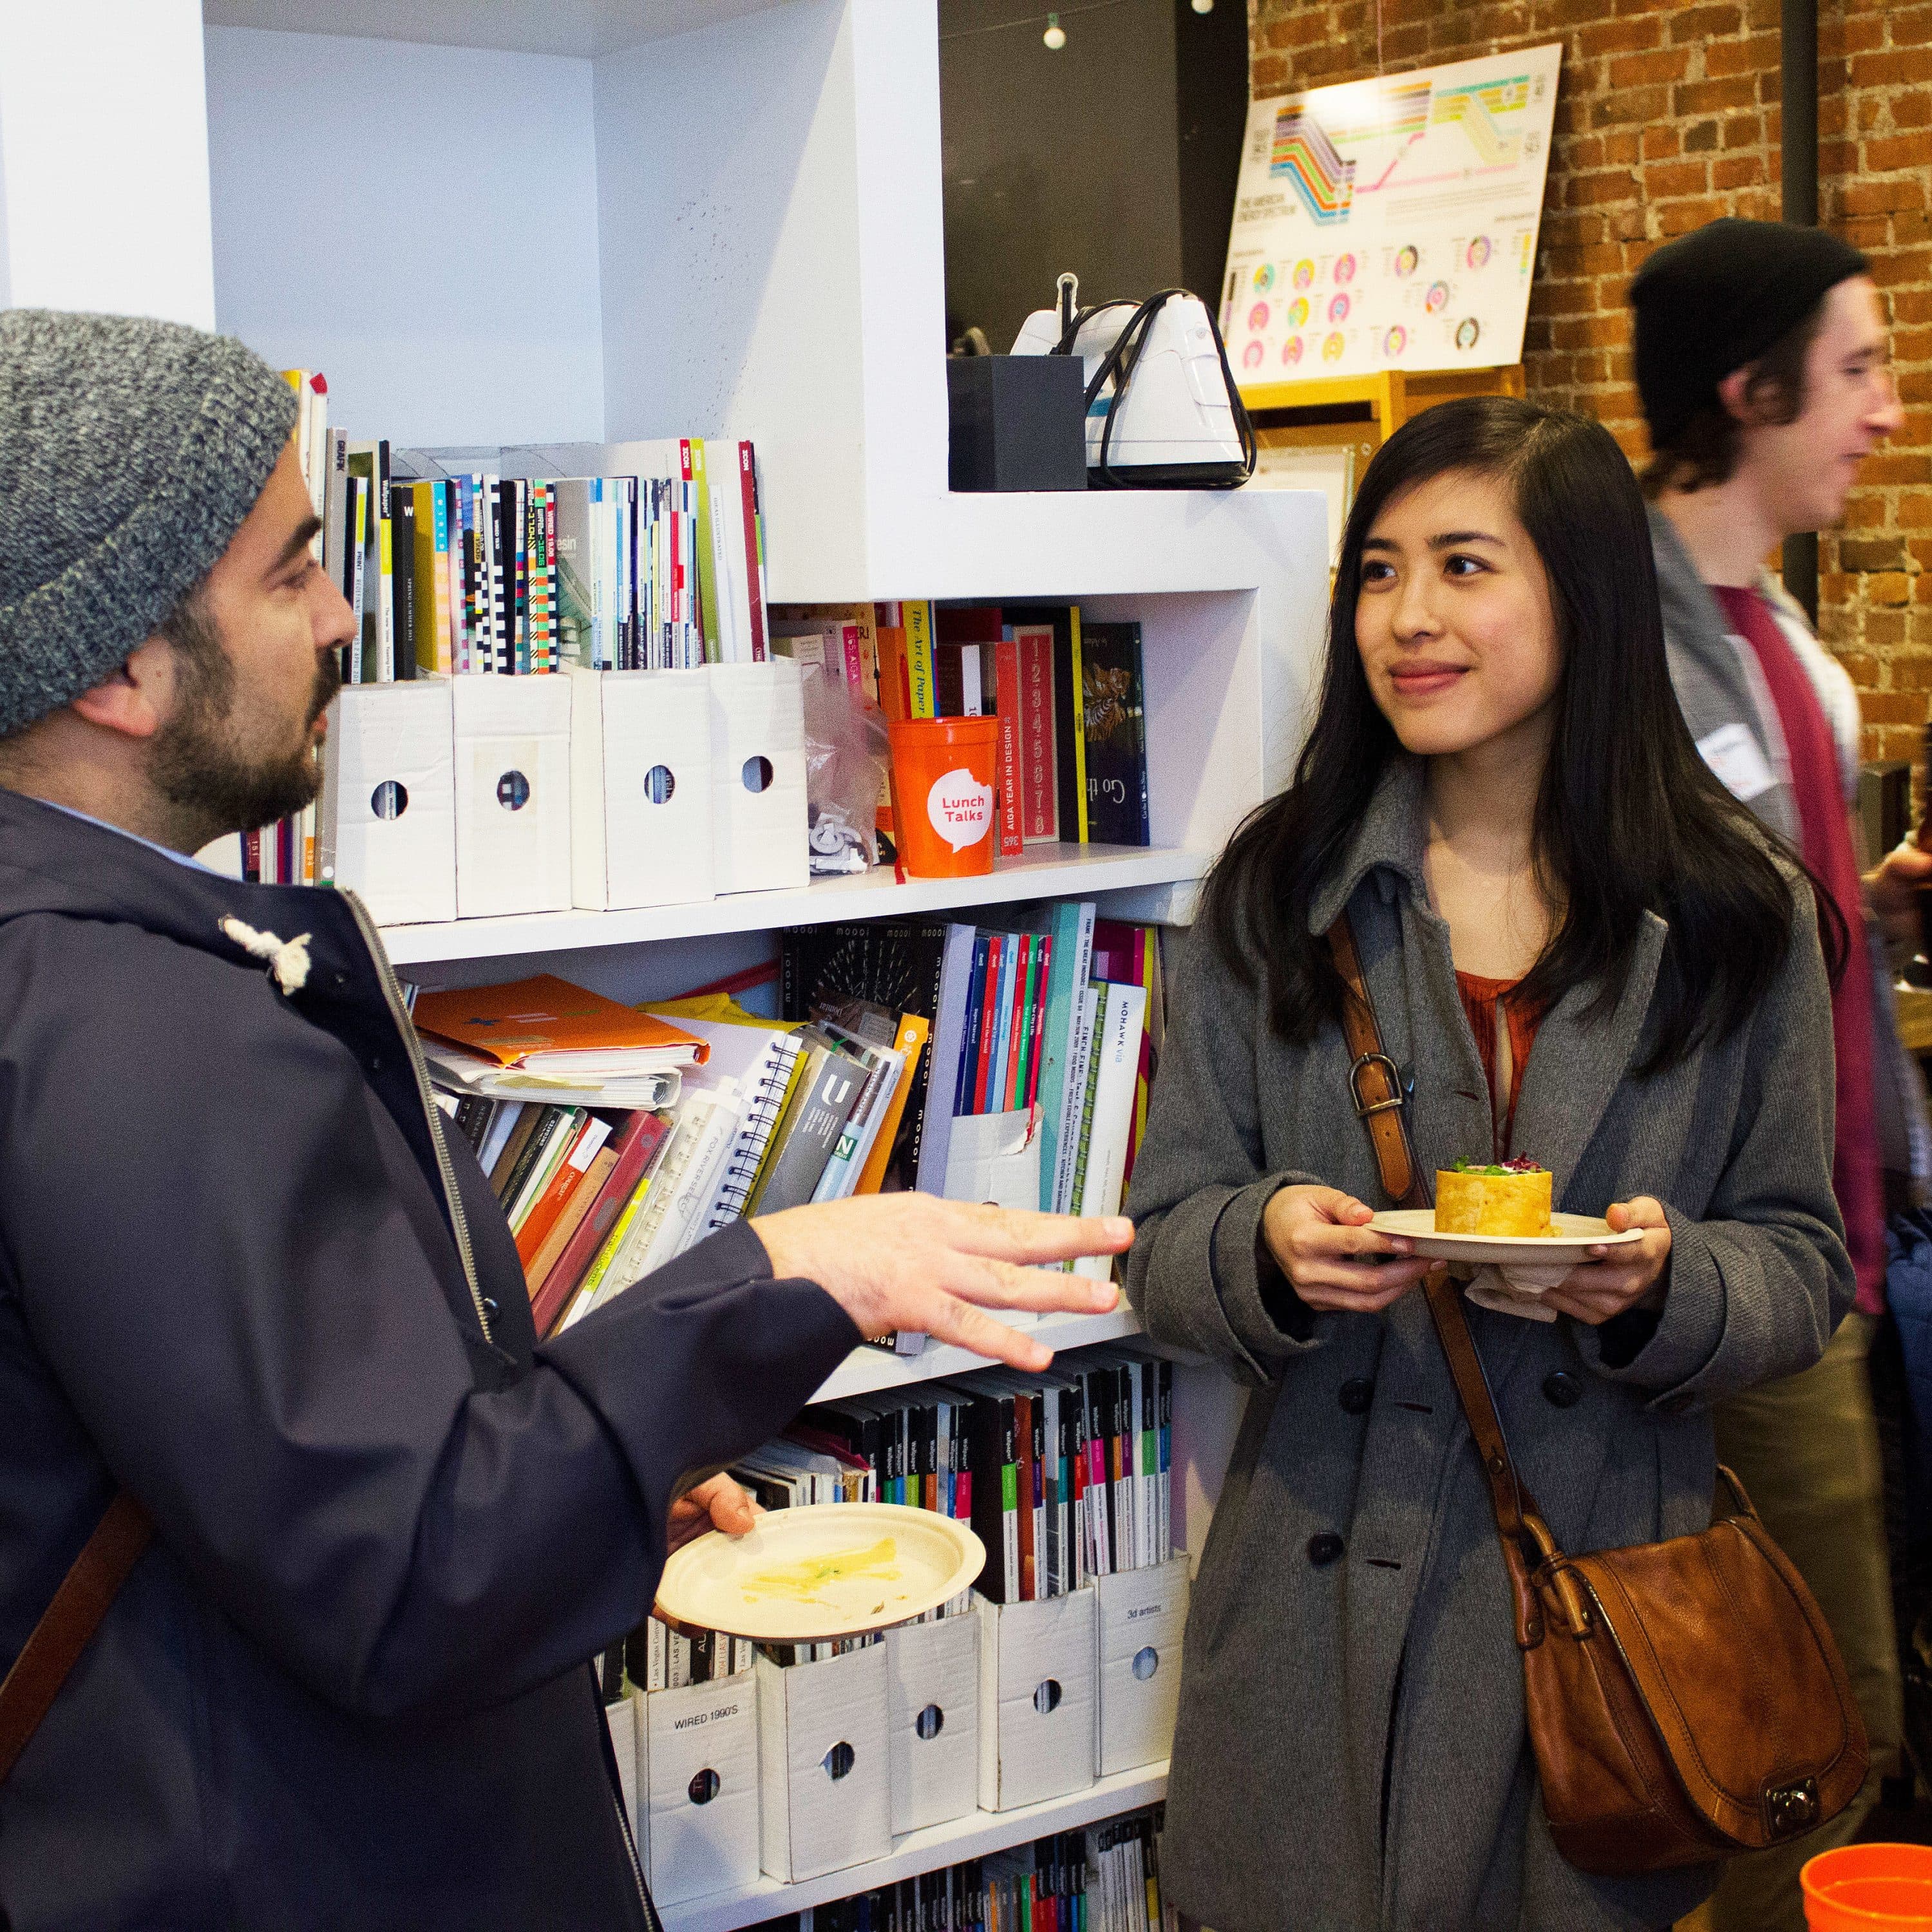 Two people, one in a beanie and backpack, and another in a gray coat, are conversing while holding plates with snacks in a room with bookshelves and colorful decor. More people are seen engaging in the background, suggesting a casual social gathering.